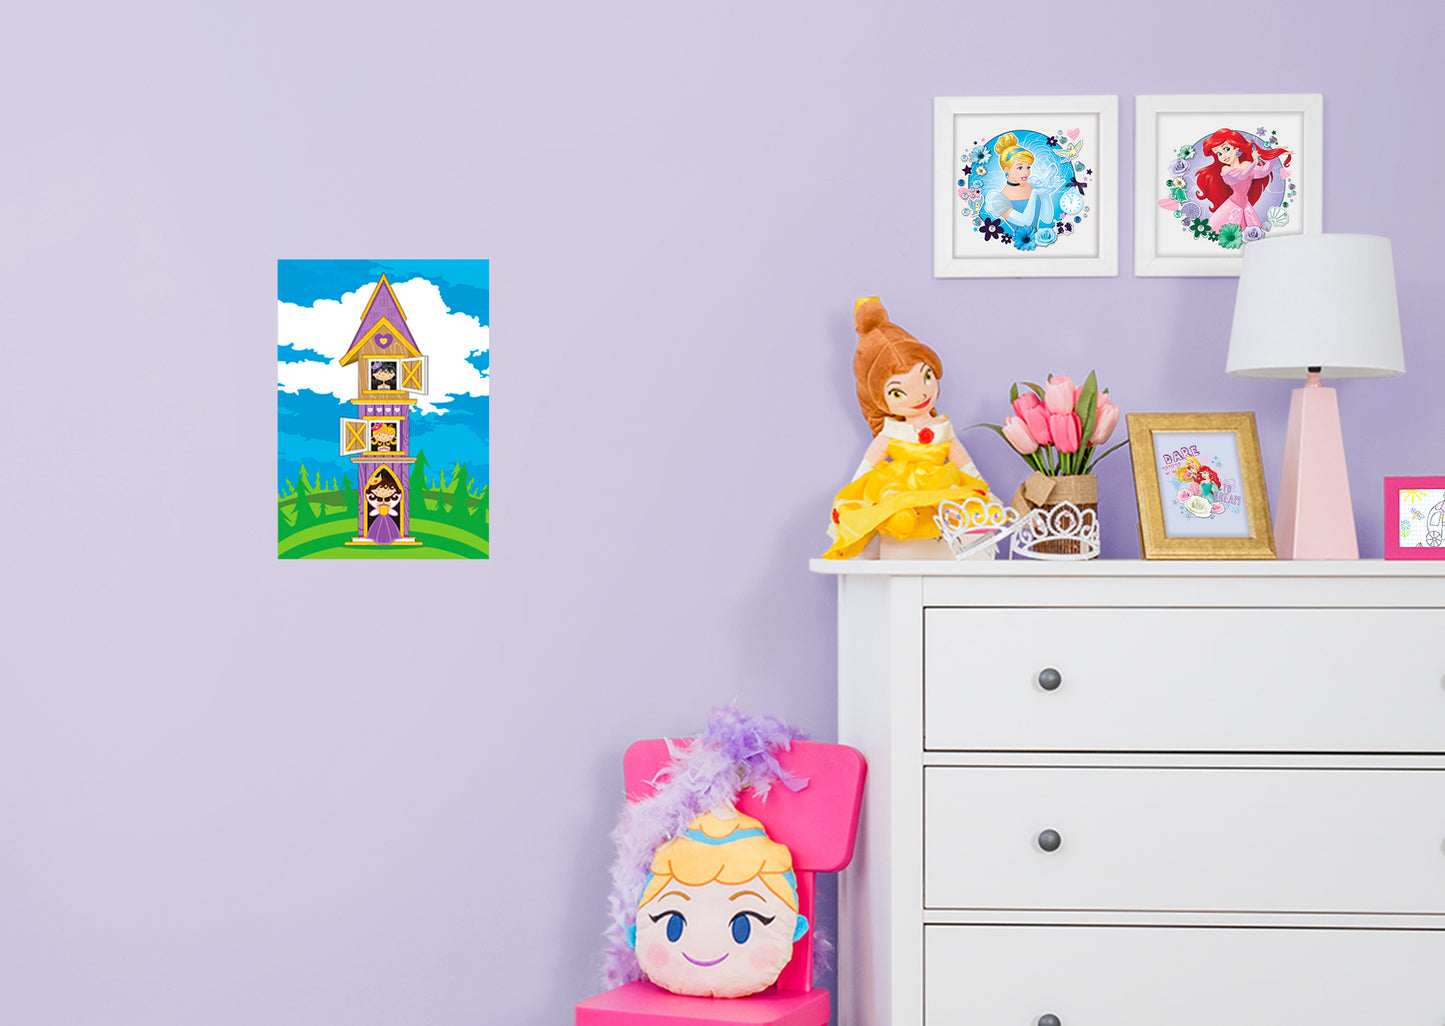 Nursery:  Tower Mural        -   Removable Wall   Adhesive Decal